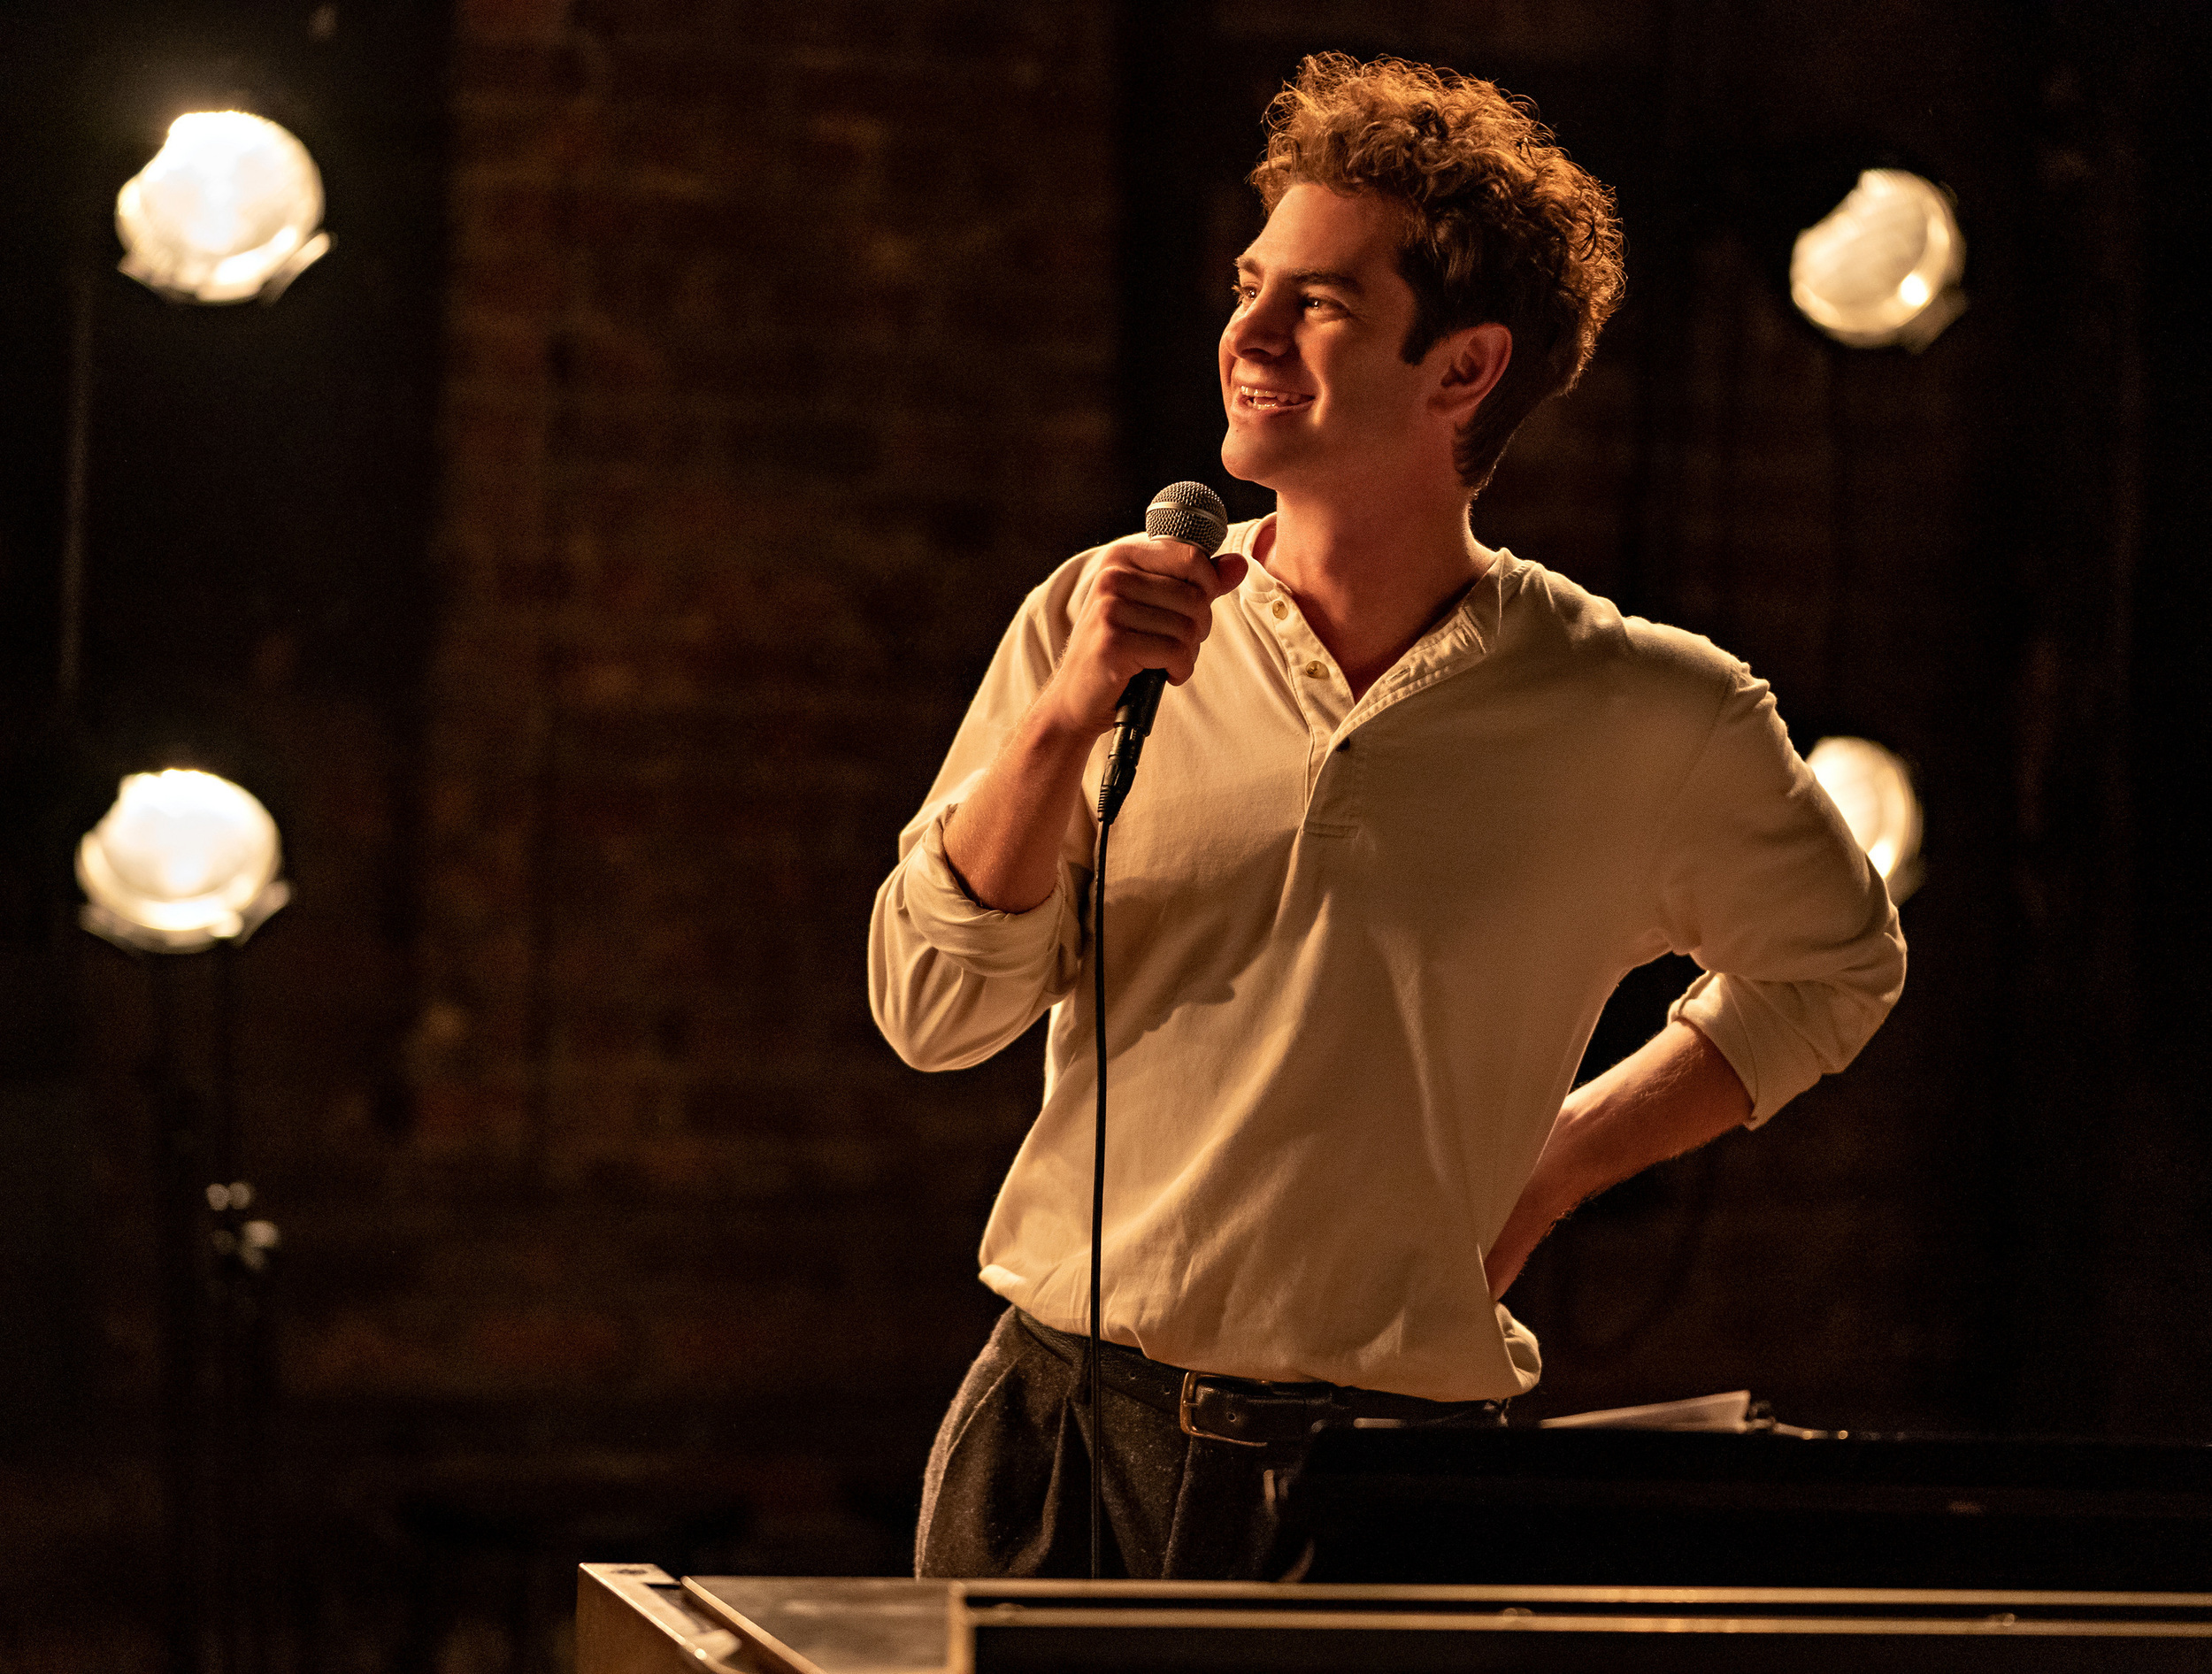 <p>Andrew Garfield plays <em>Rent</em> creator and composer Jonathan Larson in <em>tick, tick… Boom!</em>, which is based on Larson’s autobiographical musical and directed by Lin-Manuel Miranda. Larson’s story focuses on the challenges of being in a creative career and the idea of a clock constantly ticking as we decide what to do with our time or if we’ll be successful. Garfield, in his Oscar-nominated performance, completely disappears into the role of Larson and is phenomenal on the singing front, too.</p><p><a href='https://www.msn.com/en-us/community/channel/vid-cj9pqbr0vn9in2b6ddcd8sfgpfq6x6utp44fssrv6mc2gtybw0us'>Follow us on MSN to see more of our exclusive entertainment content.</a></p>